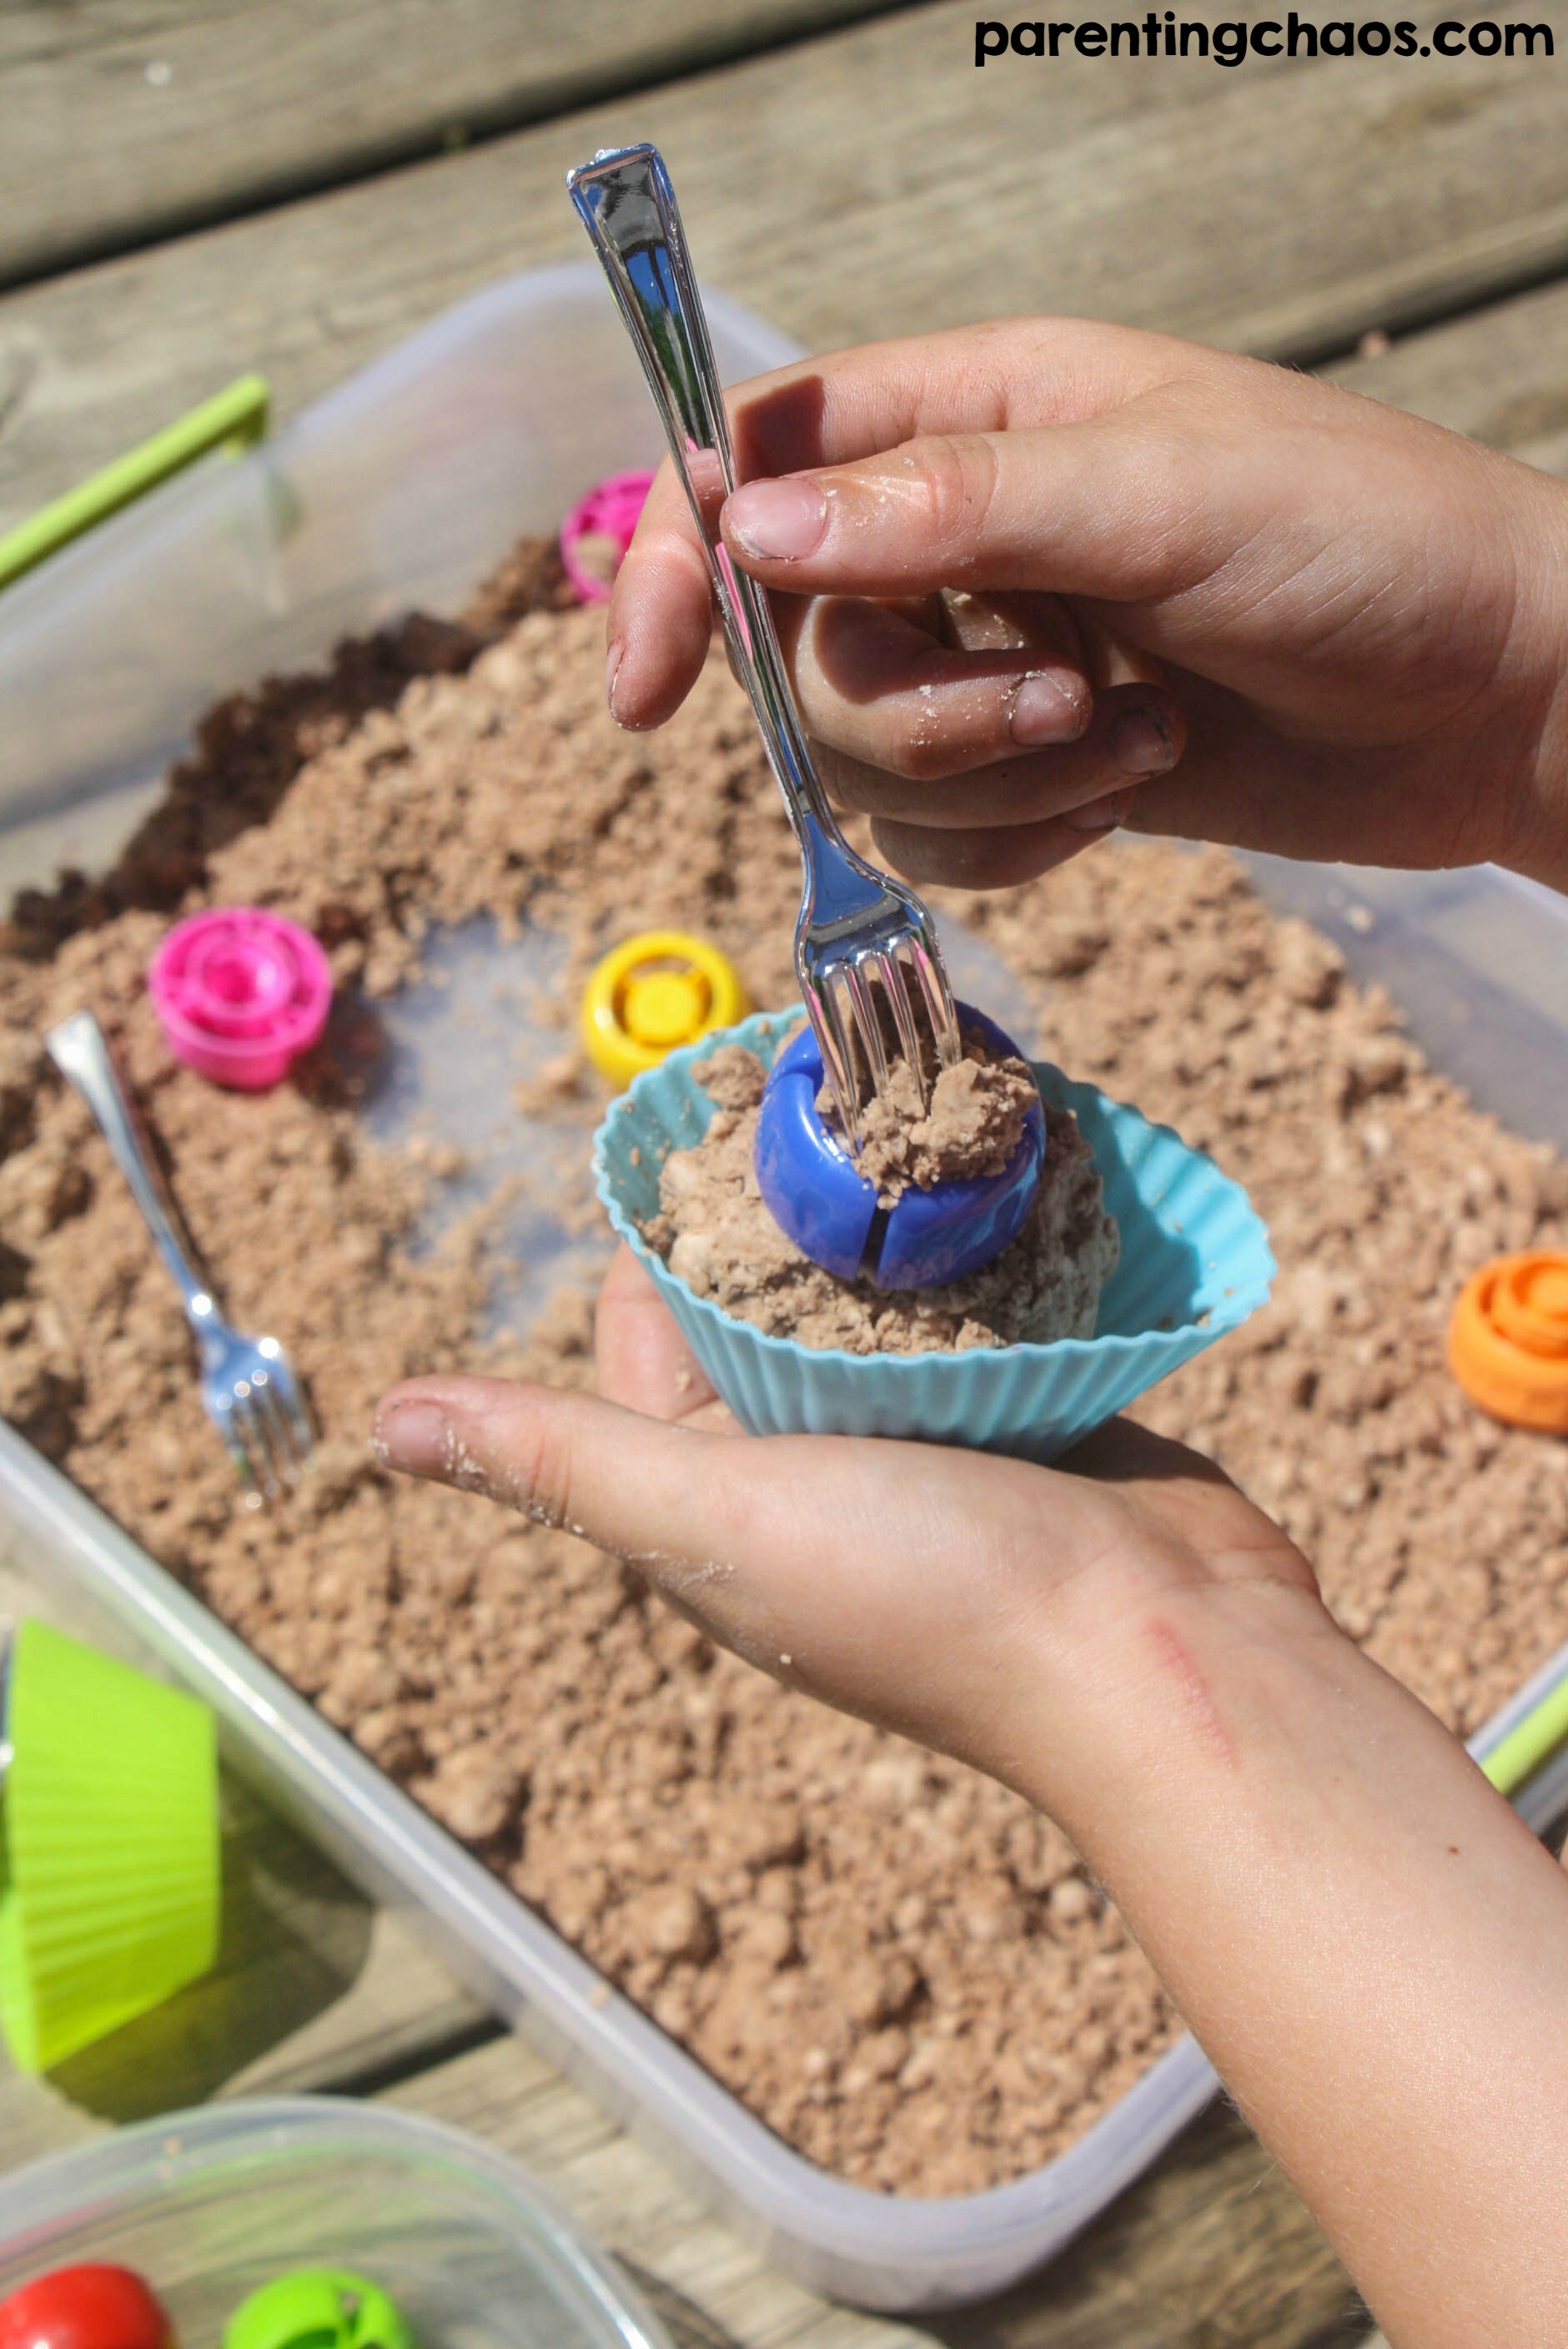 Make some home made chocolate moonsand with this easy recipe for a wonderful sensory play experience for kids! This recipe only uses 3 simple ingredients and it's gluten free so all can play.